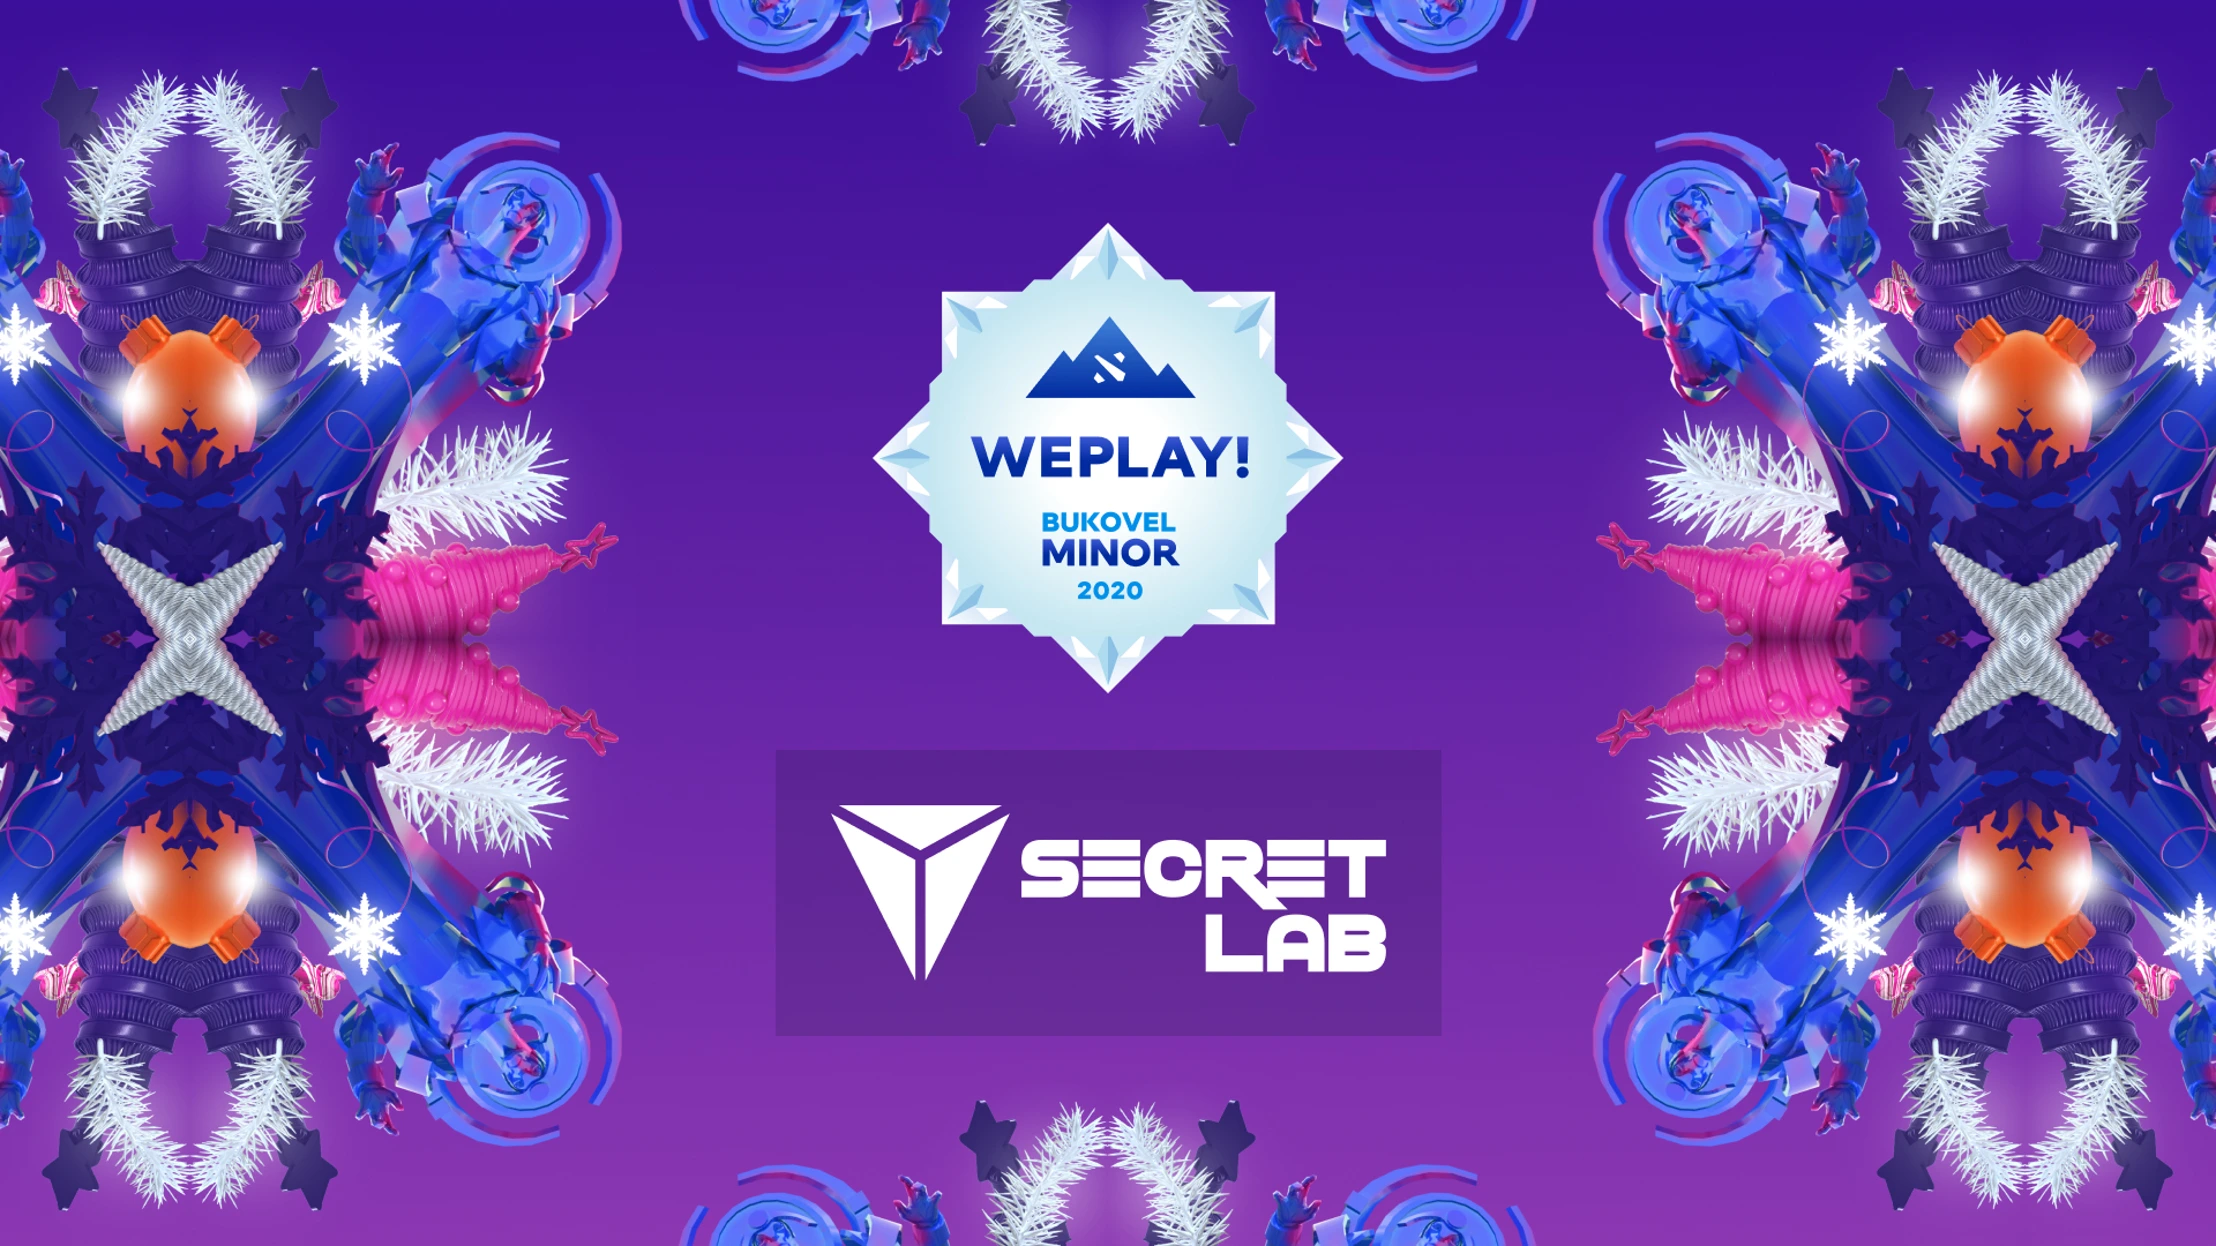 WePlay! Bukovel Minor 2020 partners with Secretlab to deliver the ultimate sitting experience for the players